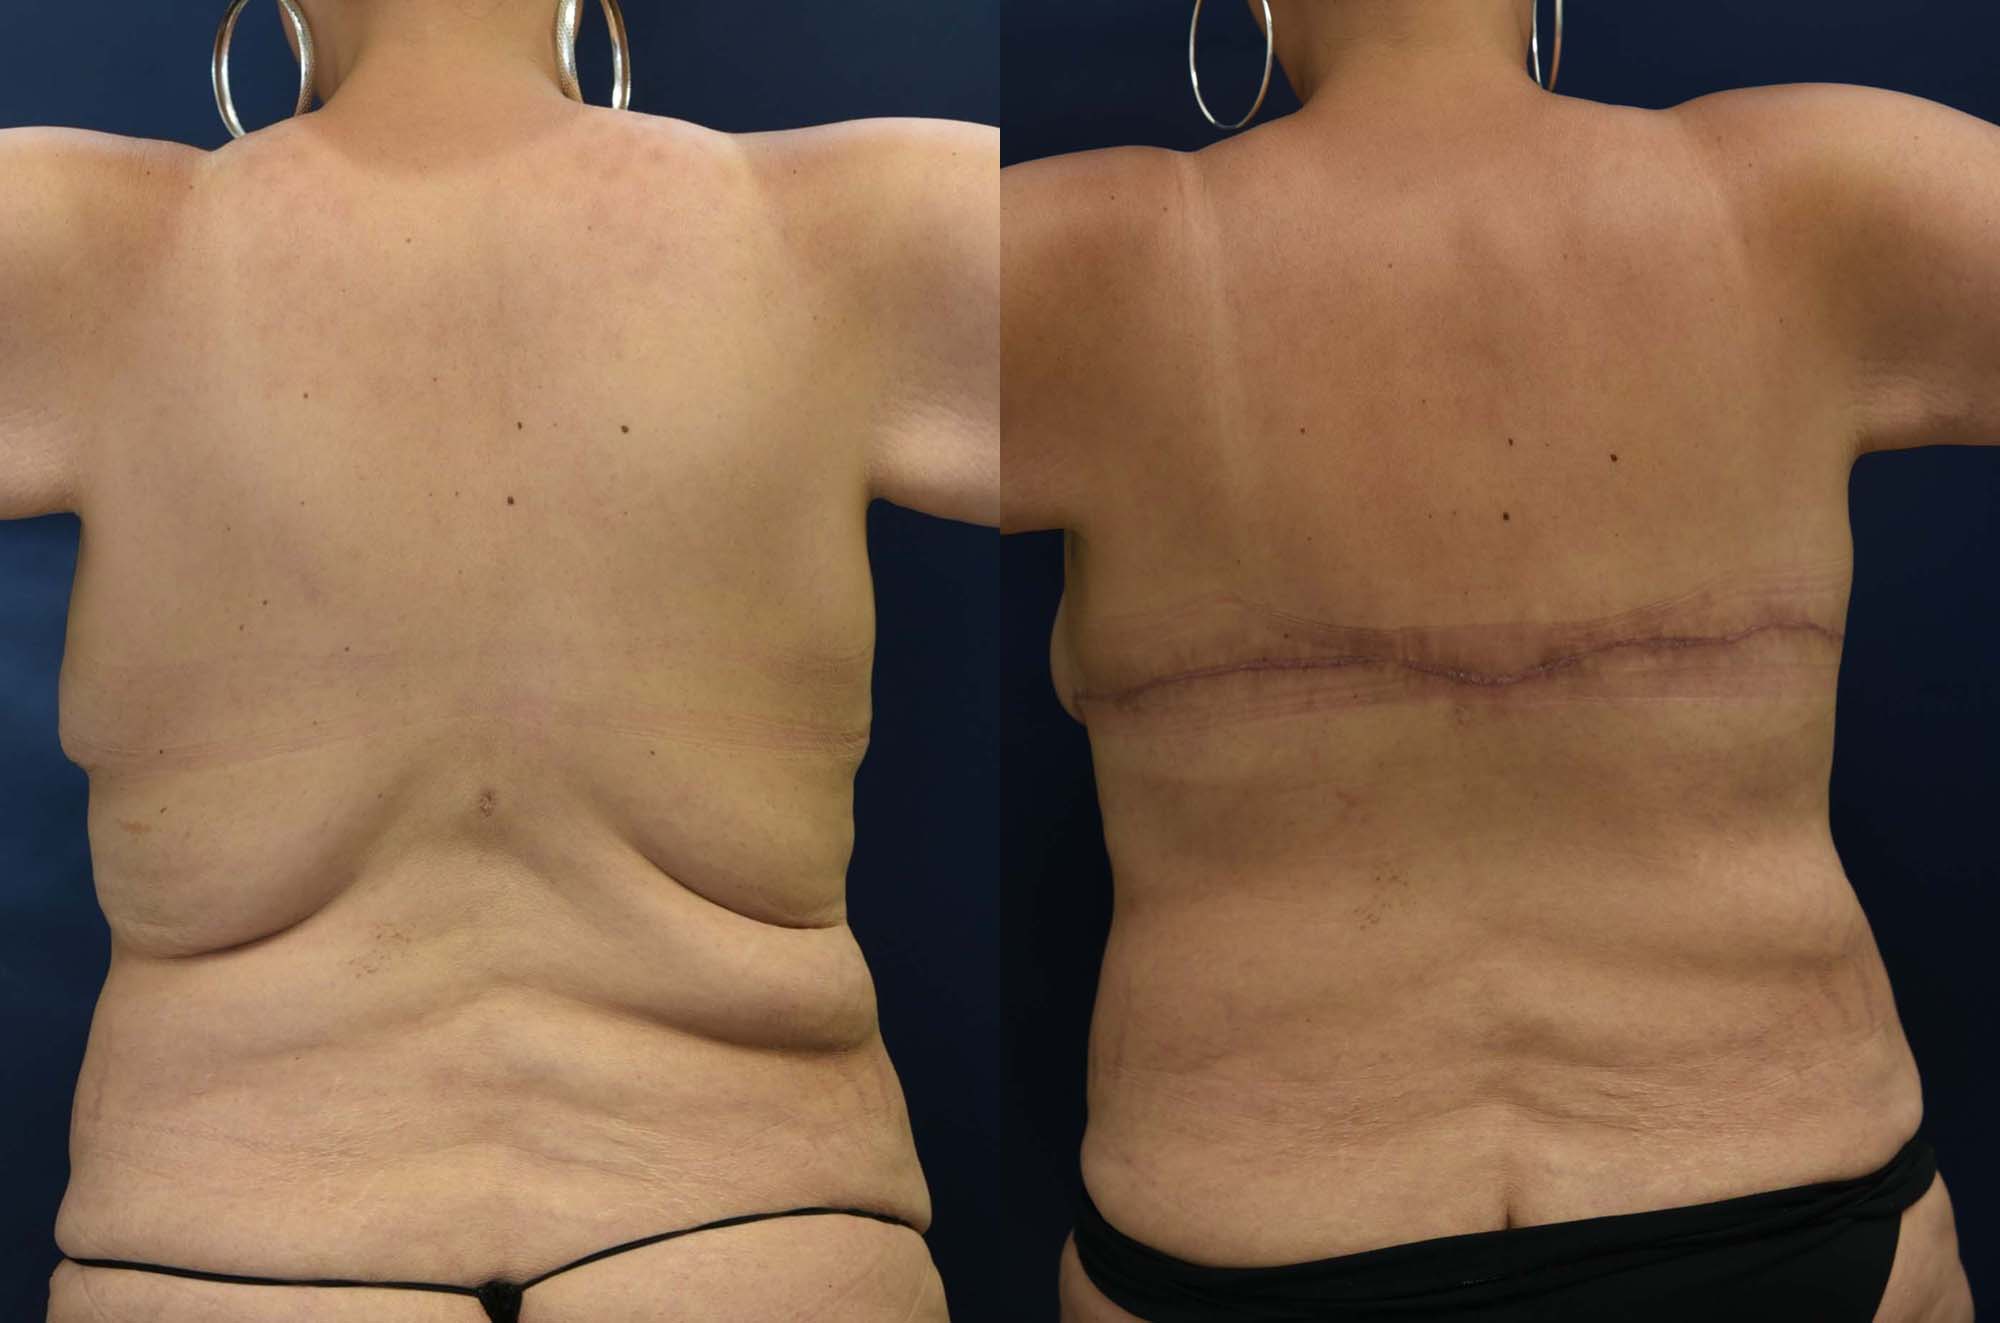 Back Lift Before and After Photo by Dr. Leveque of Gulf Coast Plastic Surgery in Pensacola, FL